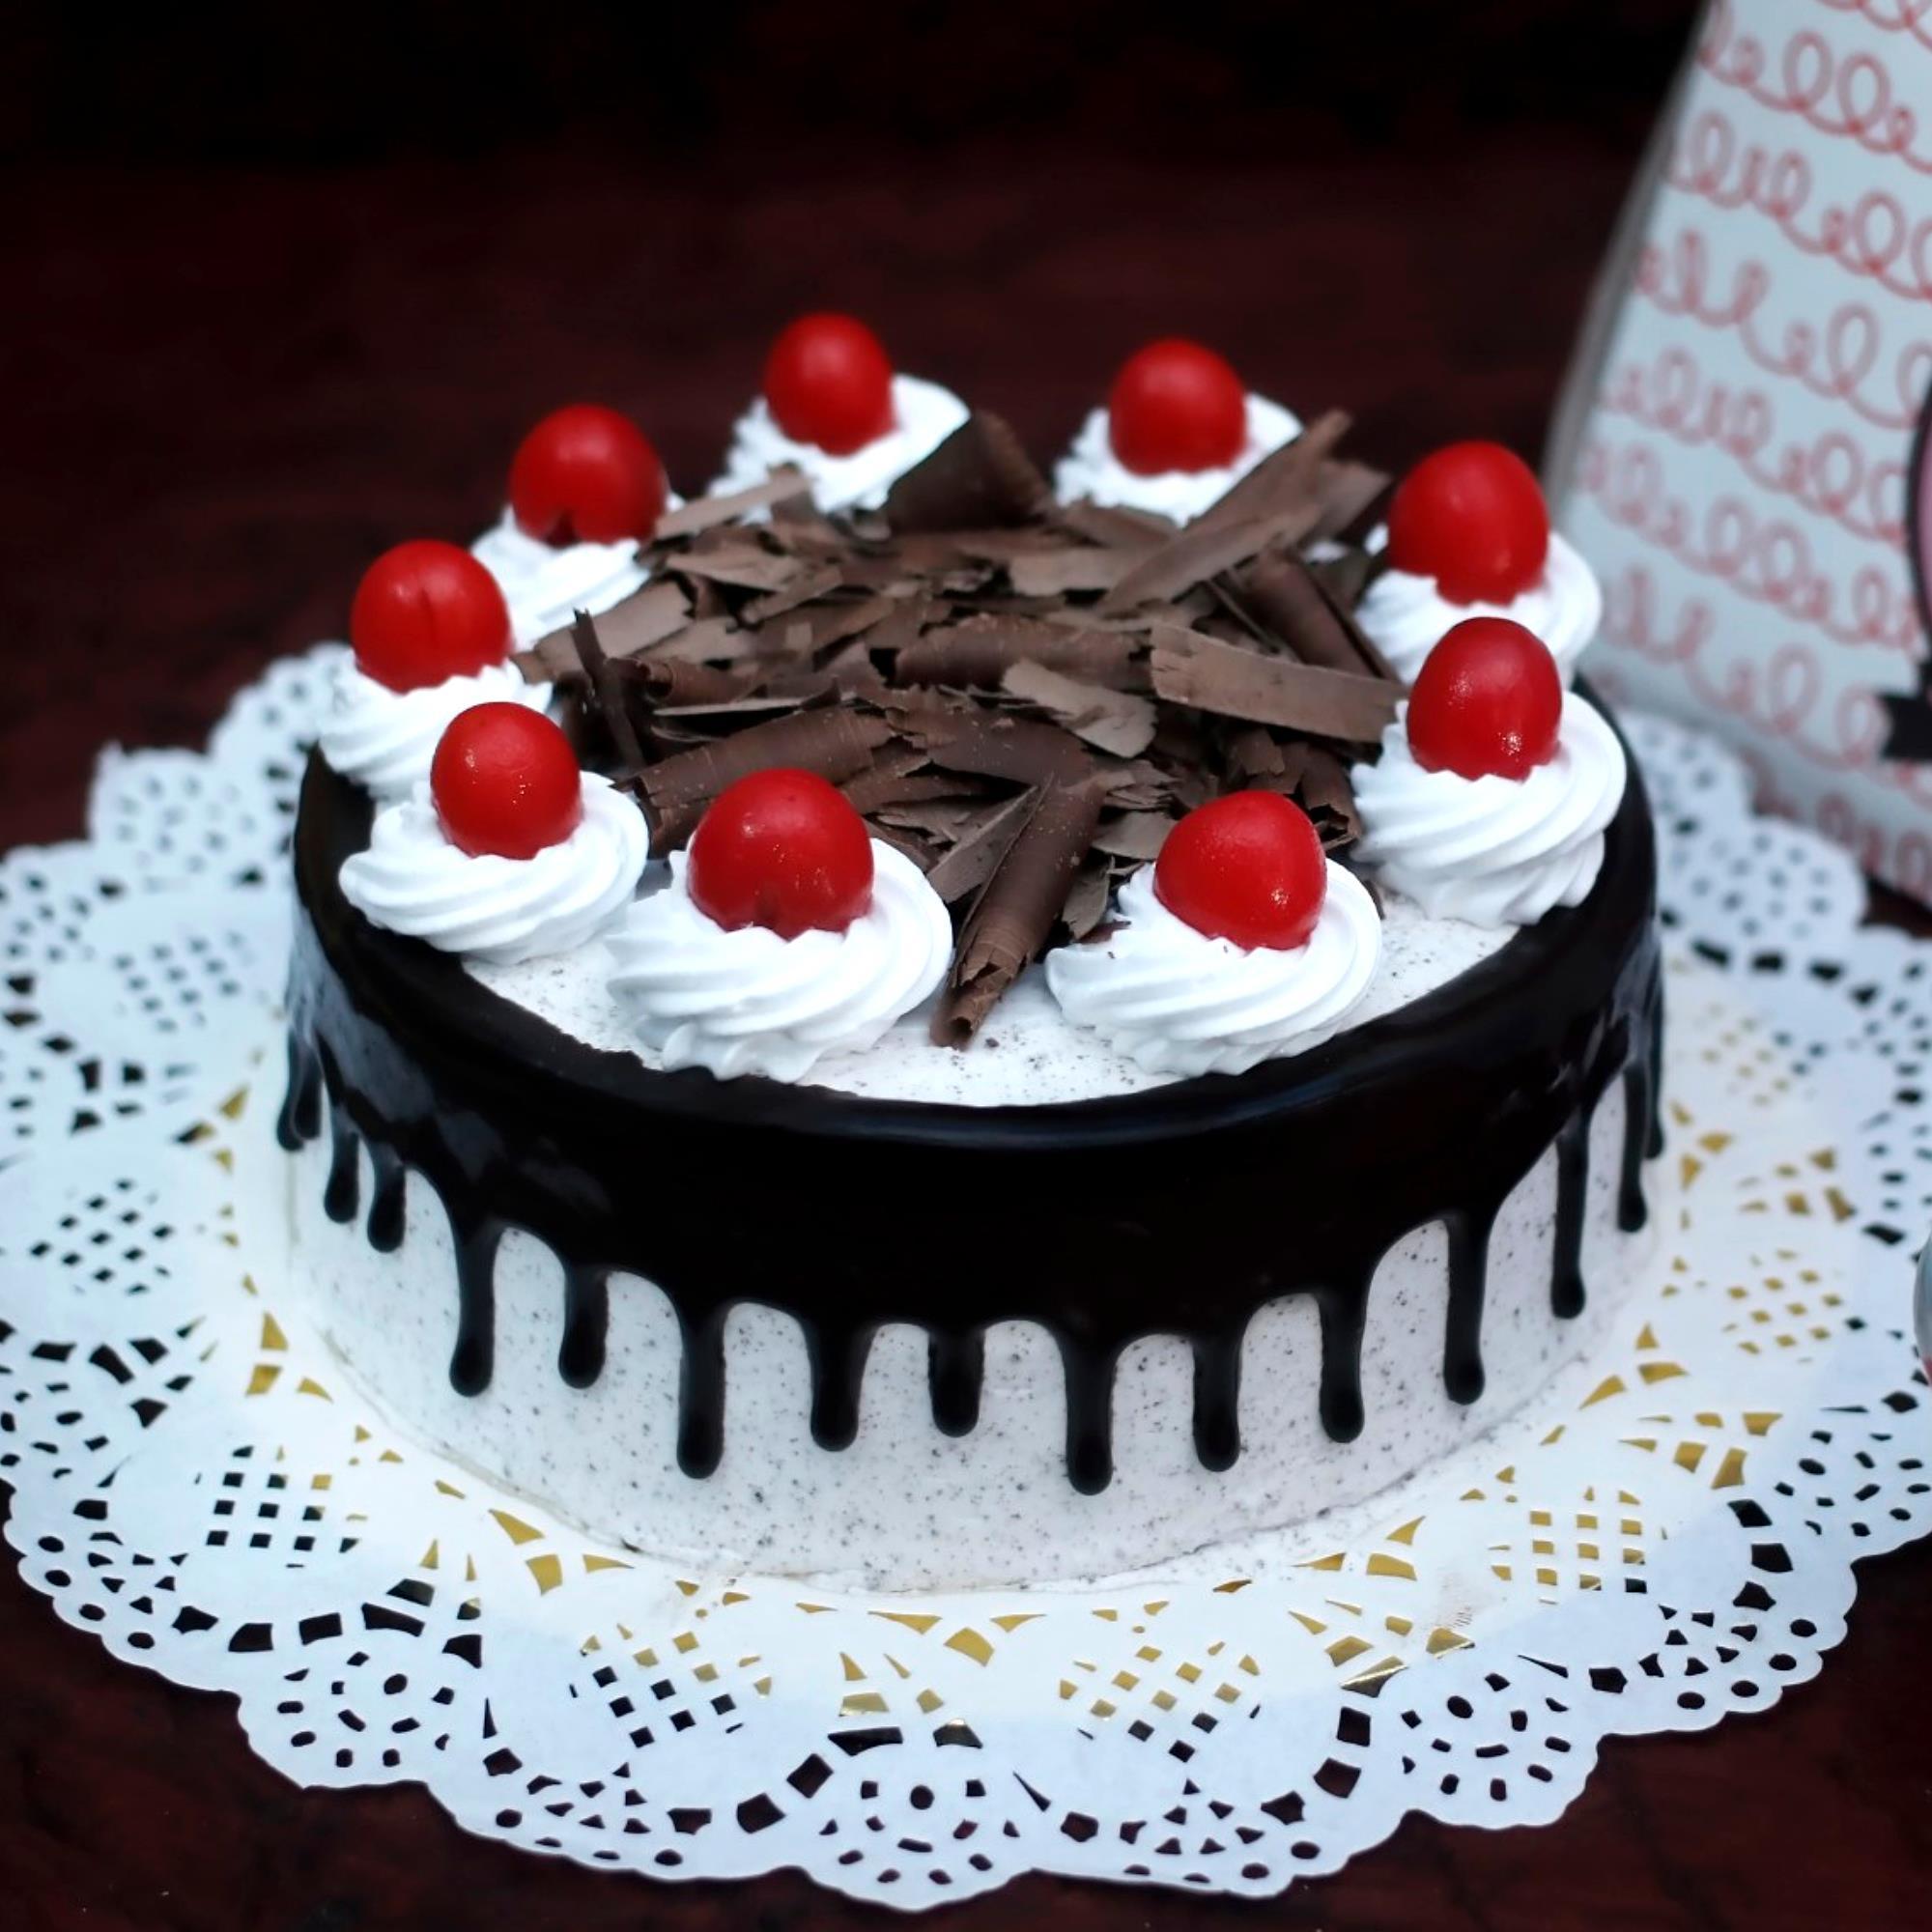 Hairy Bikers' Black Forest gâteau recipe - BBC Food